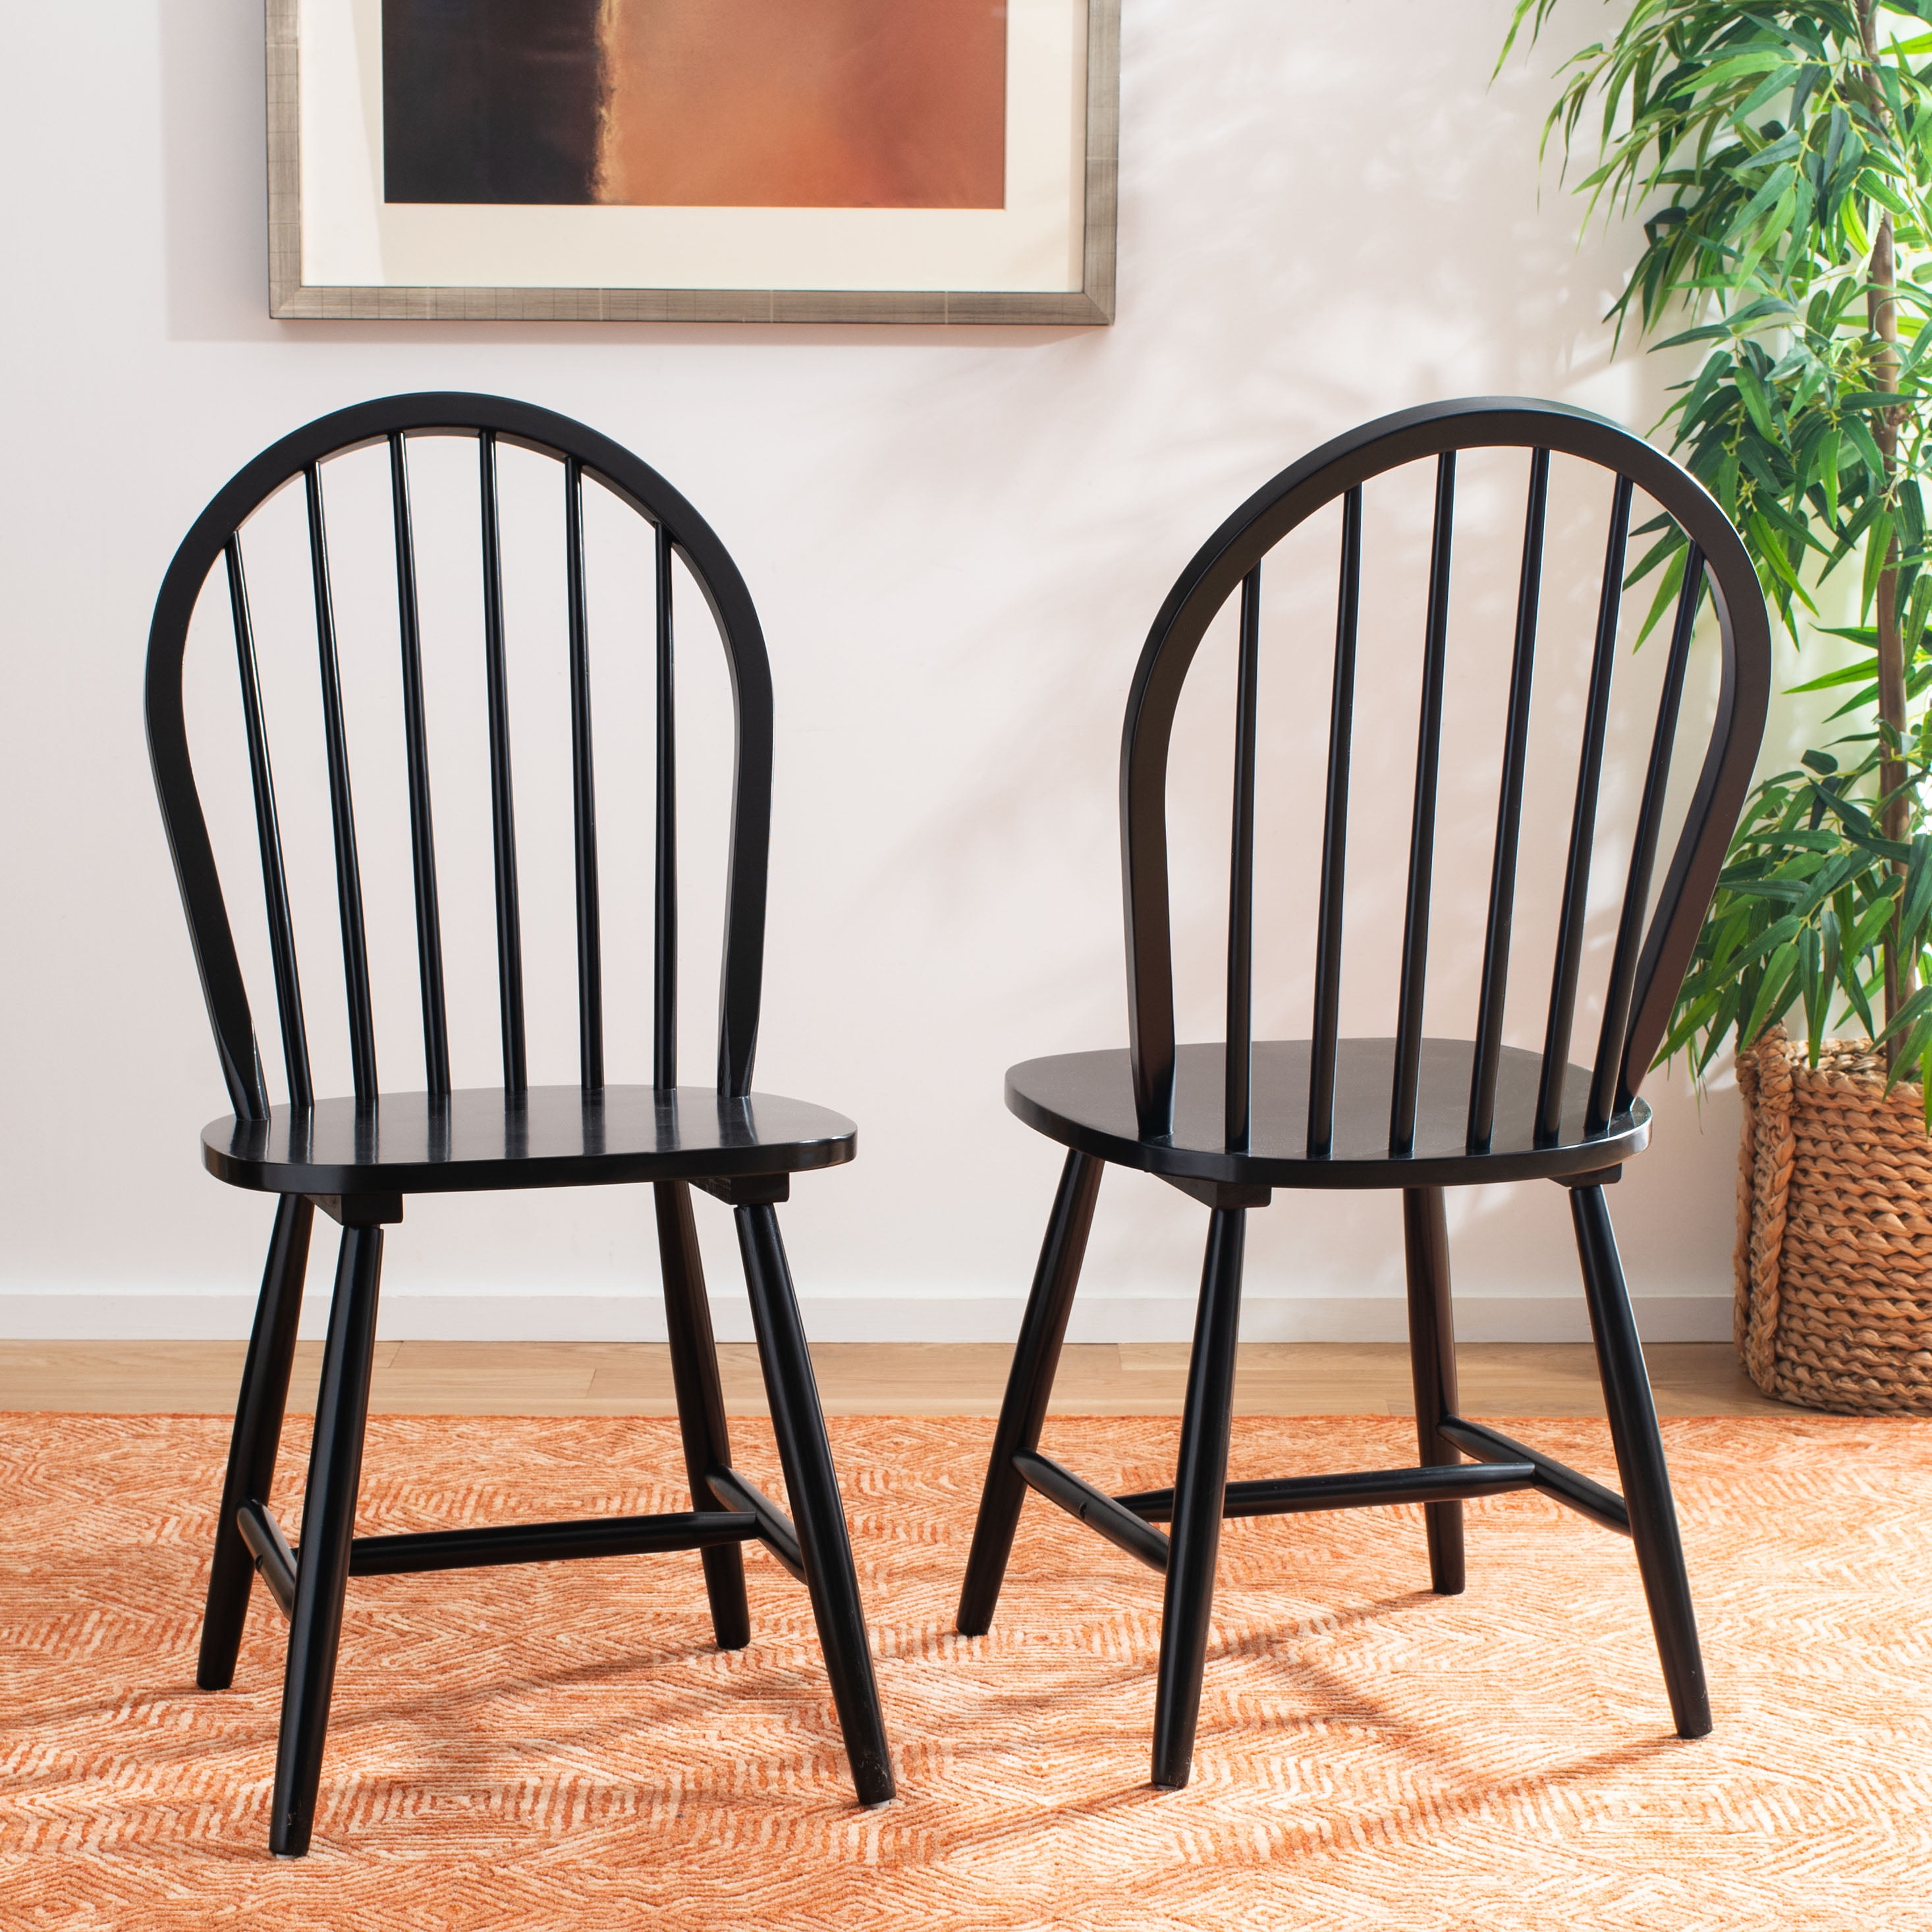 Safavieh Camden Spindle Back Dining Chair, Set of 2, Black